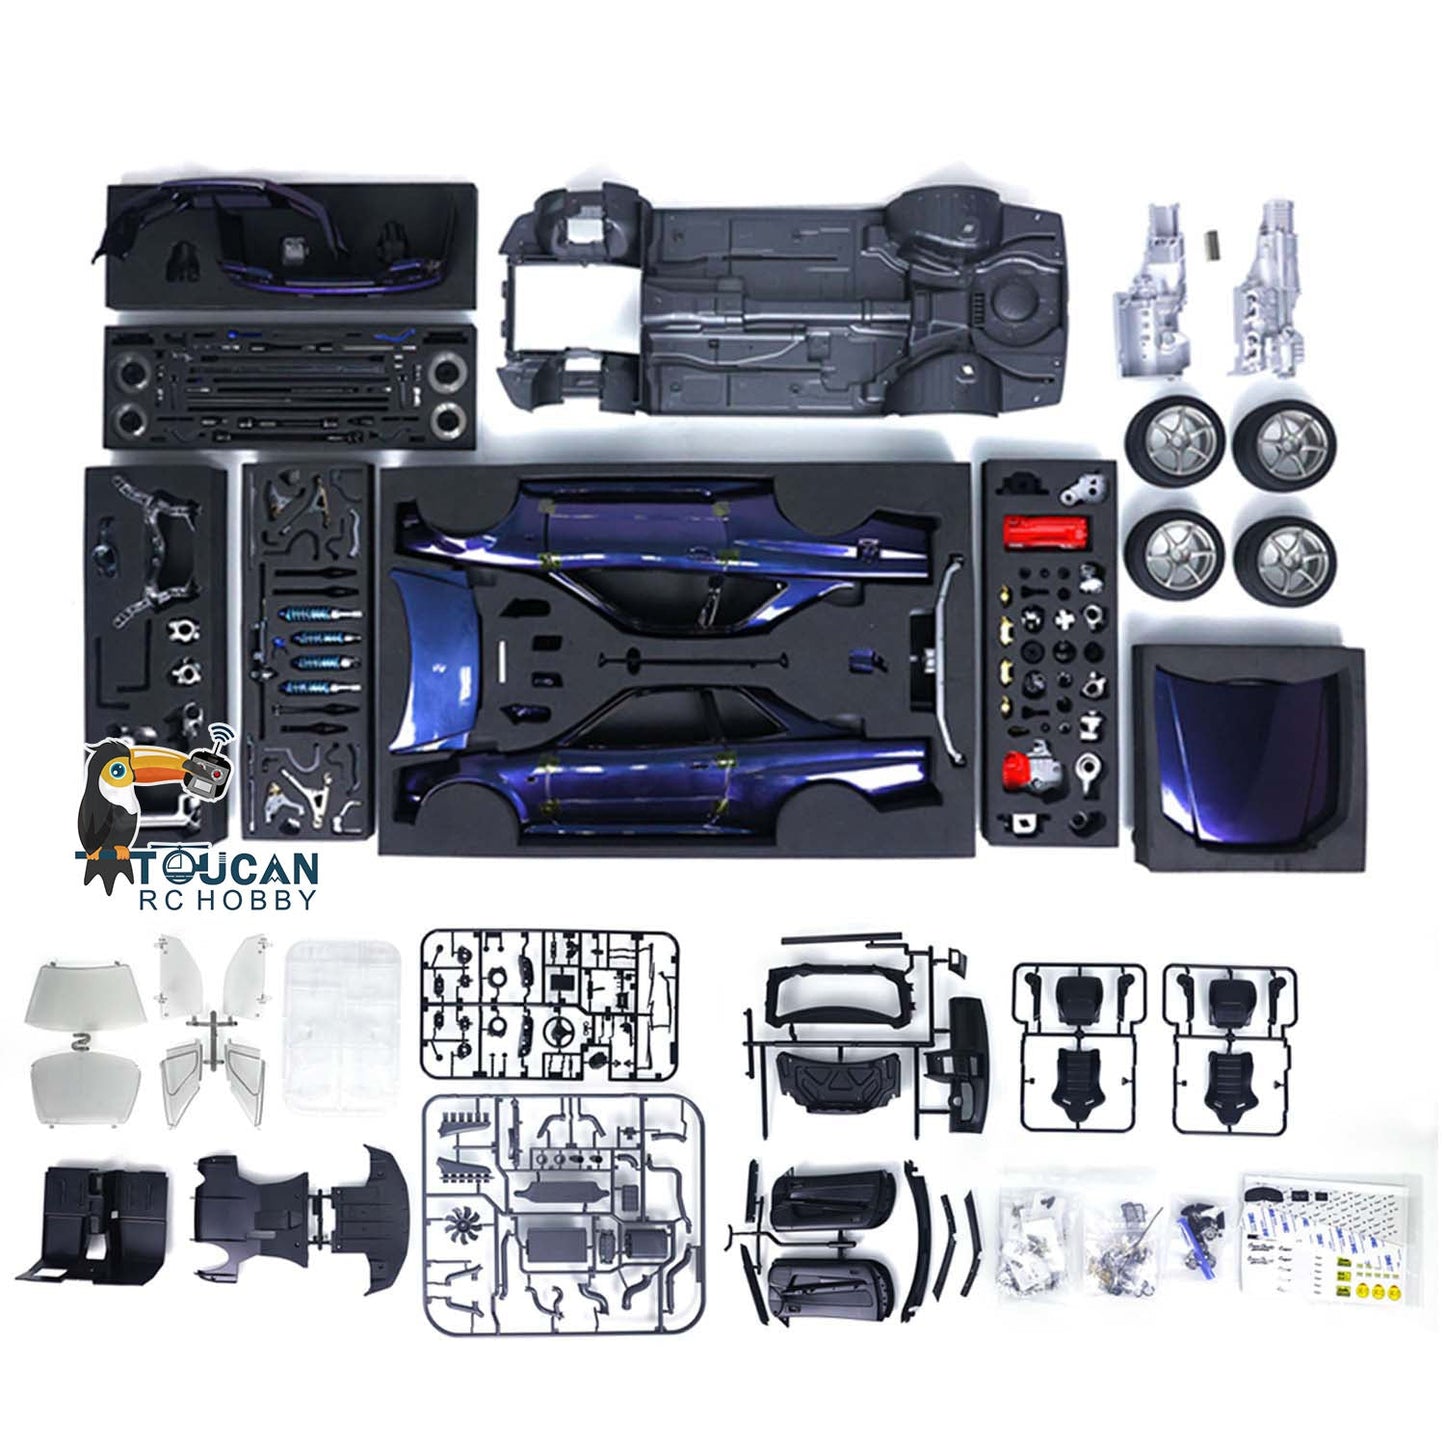 IN STOCK Capo 1/8 Unassembled 4x4 4WD R34 RC Racing Drifting Car for Collection